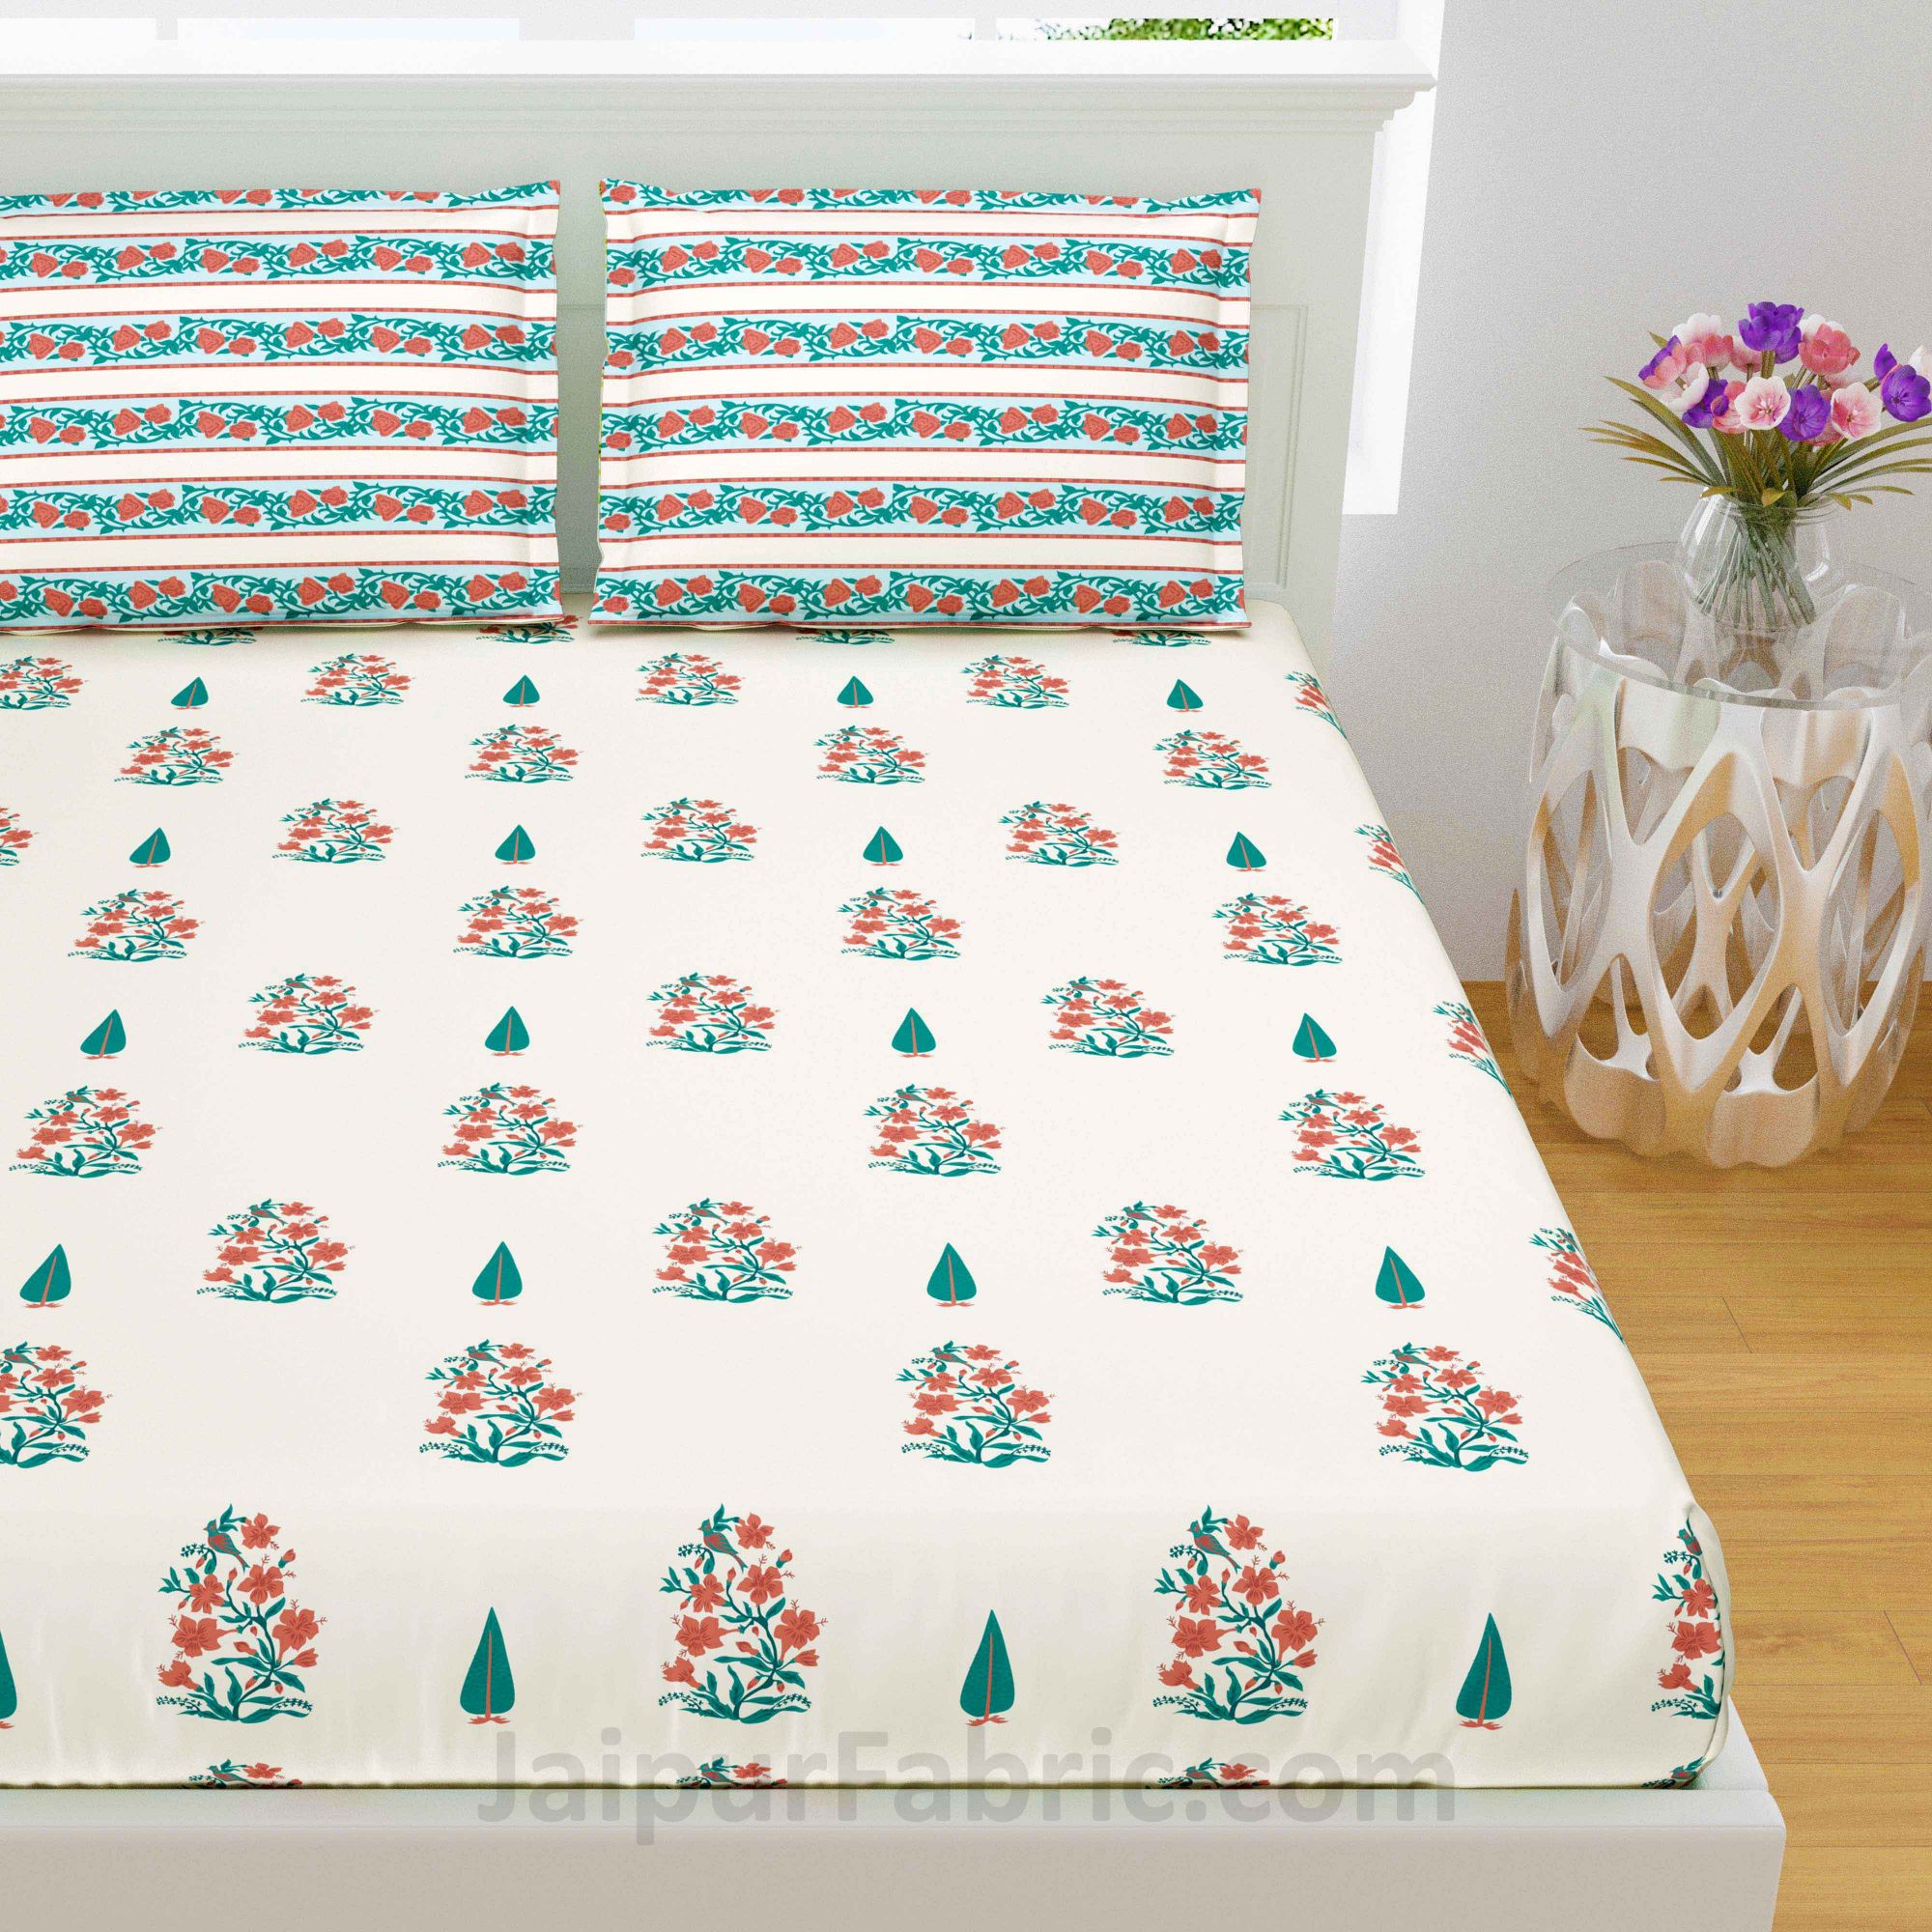 Peach Turquoise Boota Block Print Pure Cotton King Size Double BedSheet